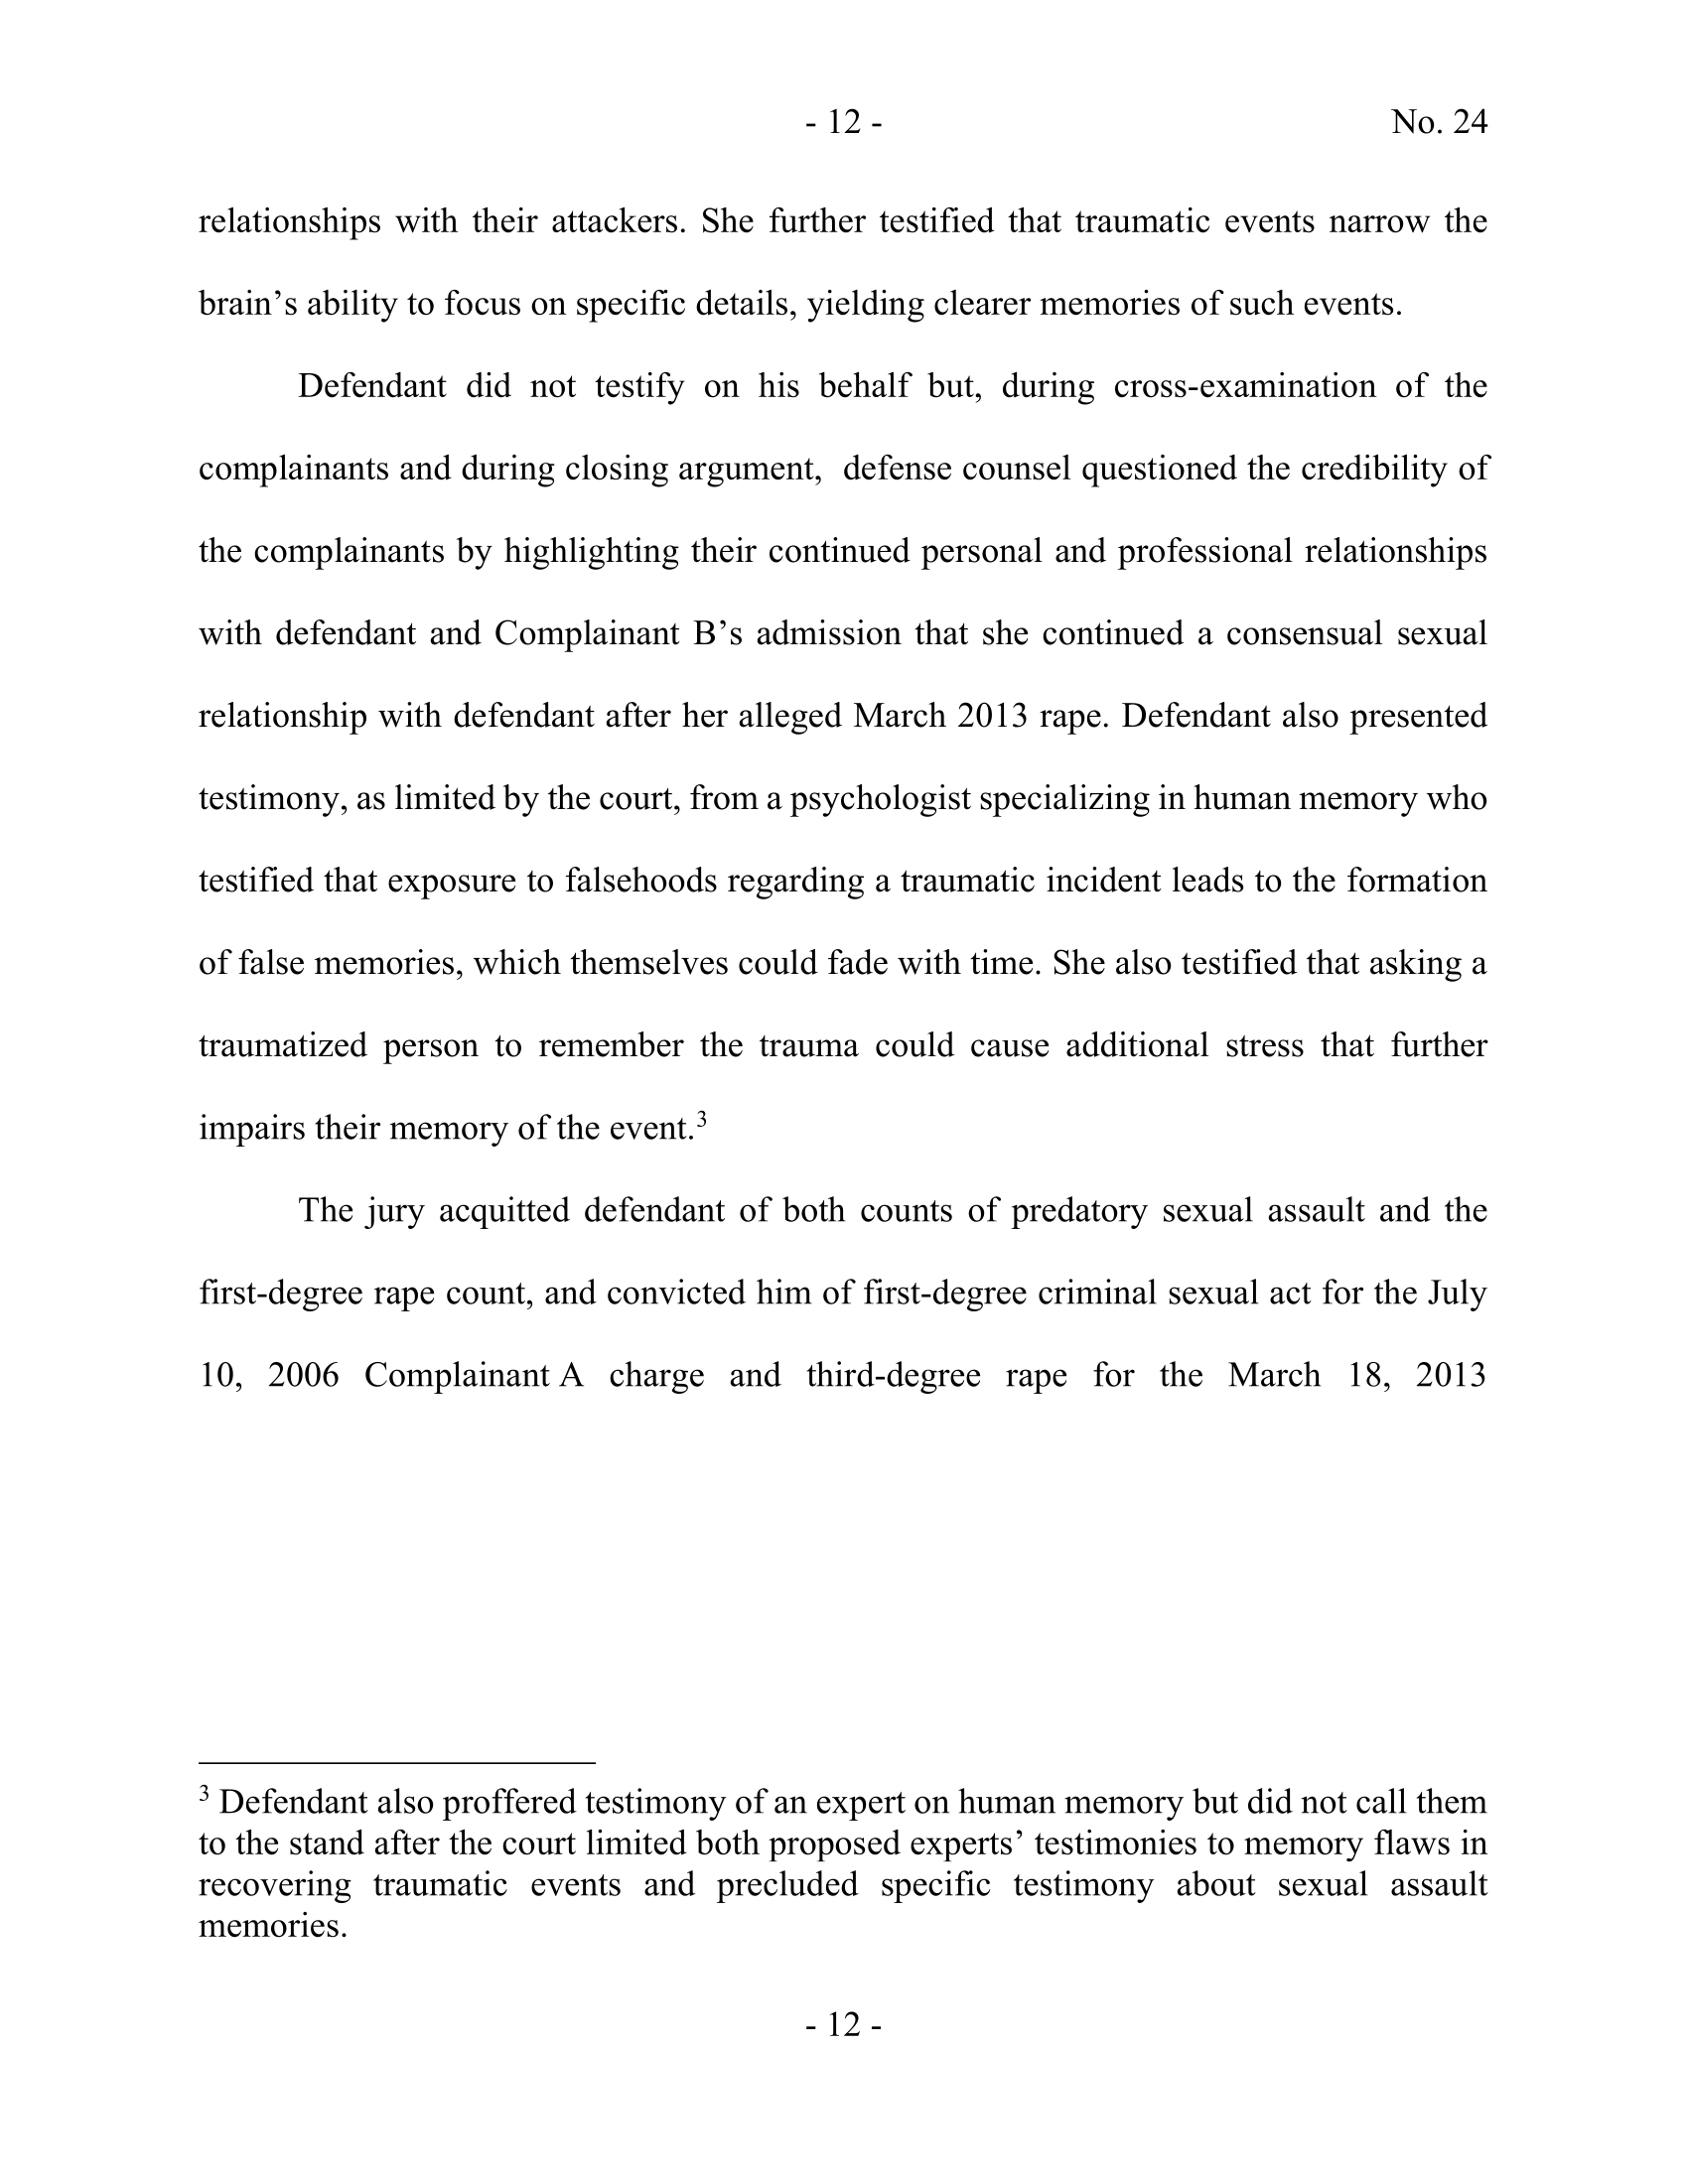 Page 12 of undefined PDF document.